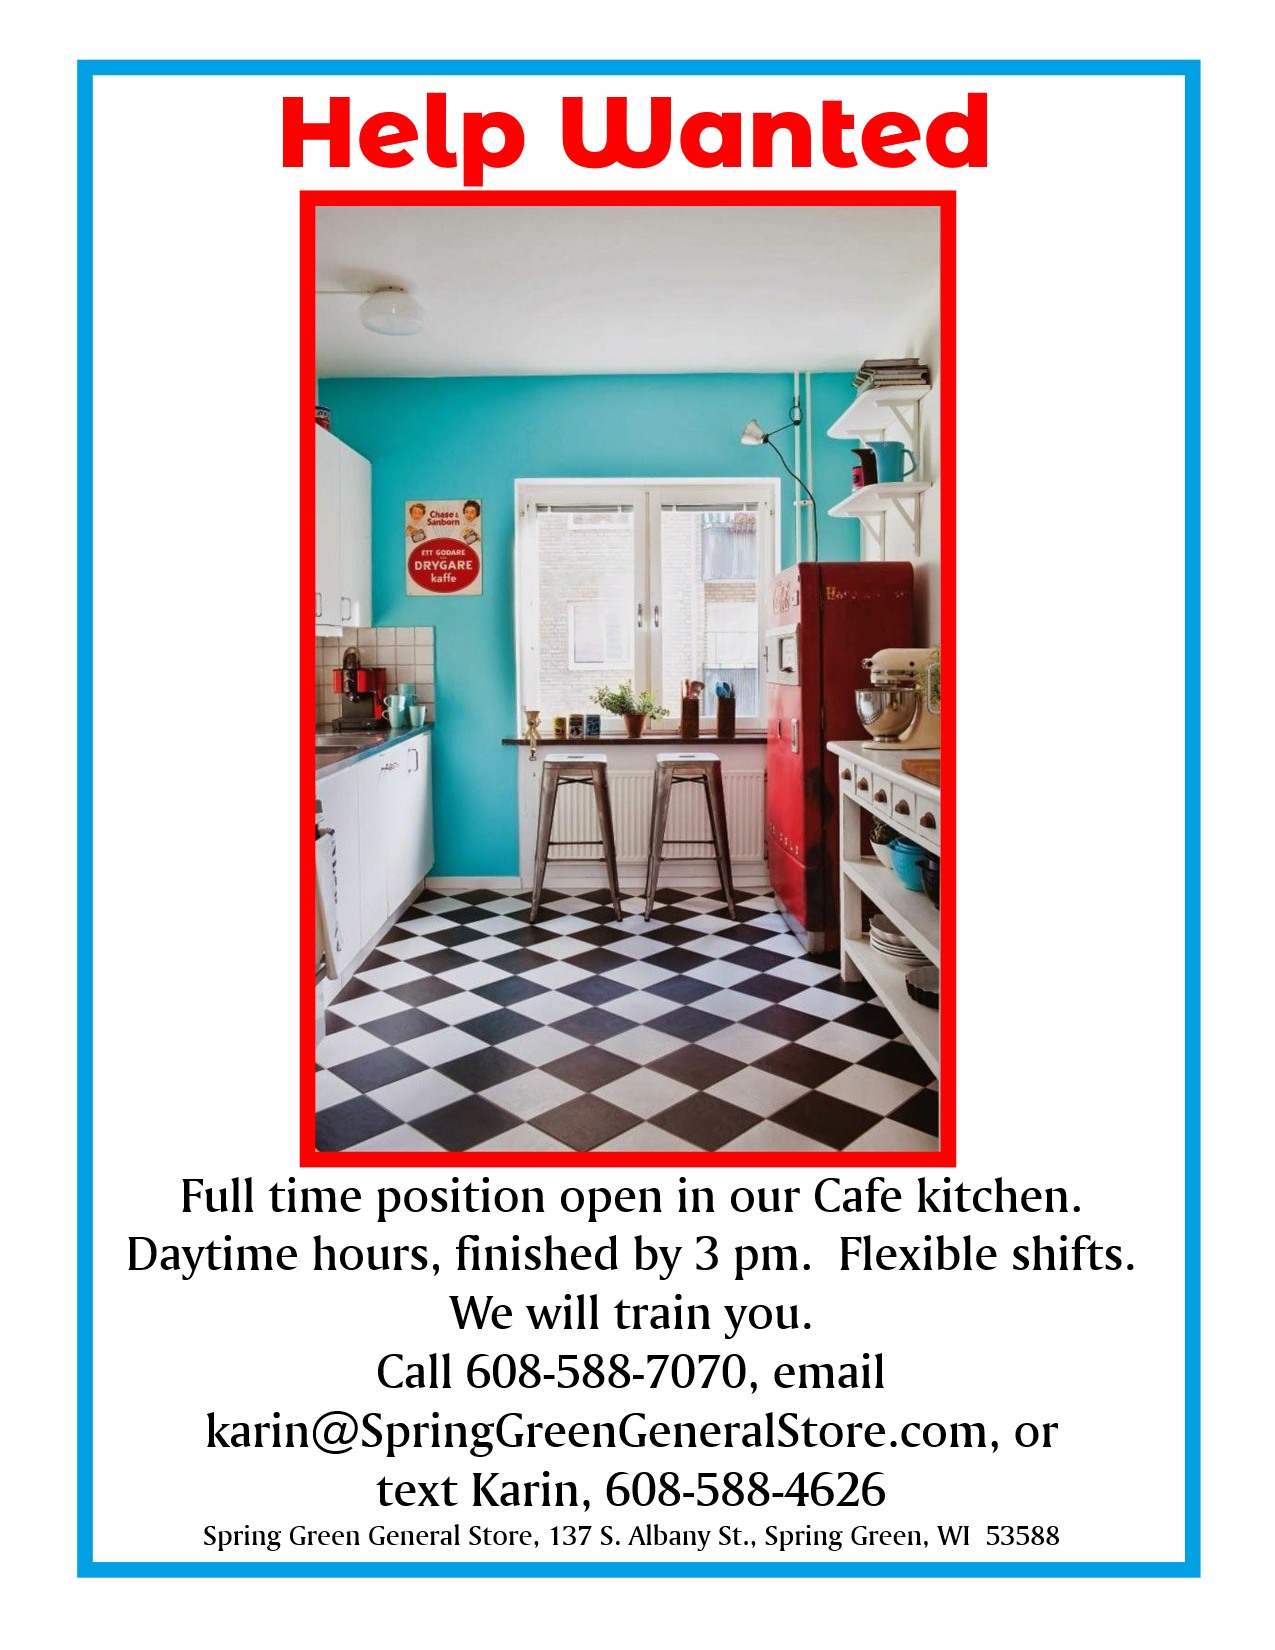 We are looking for a person to work with us in the kitchen at the General Store…